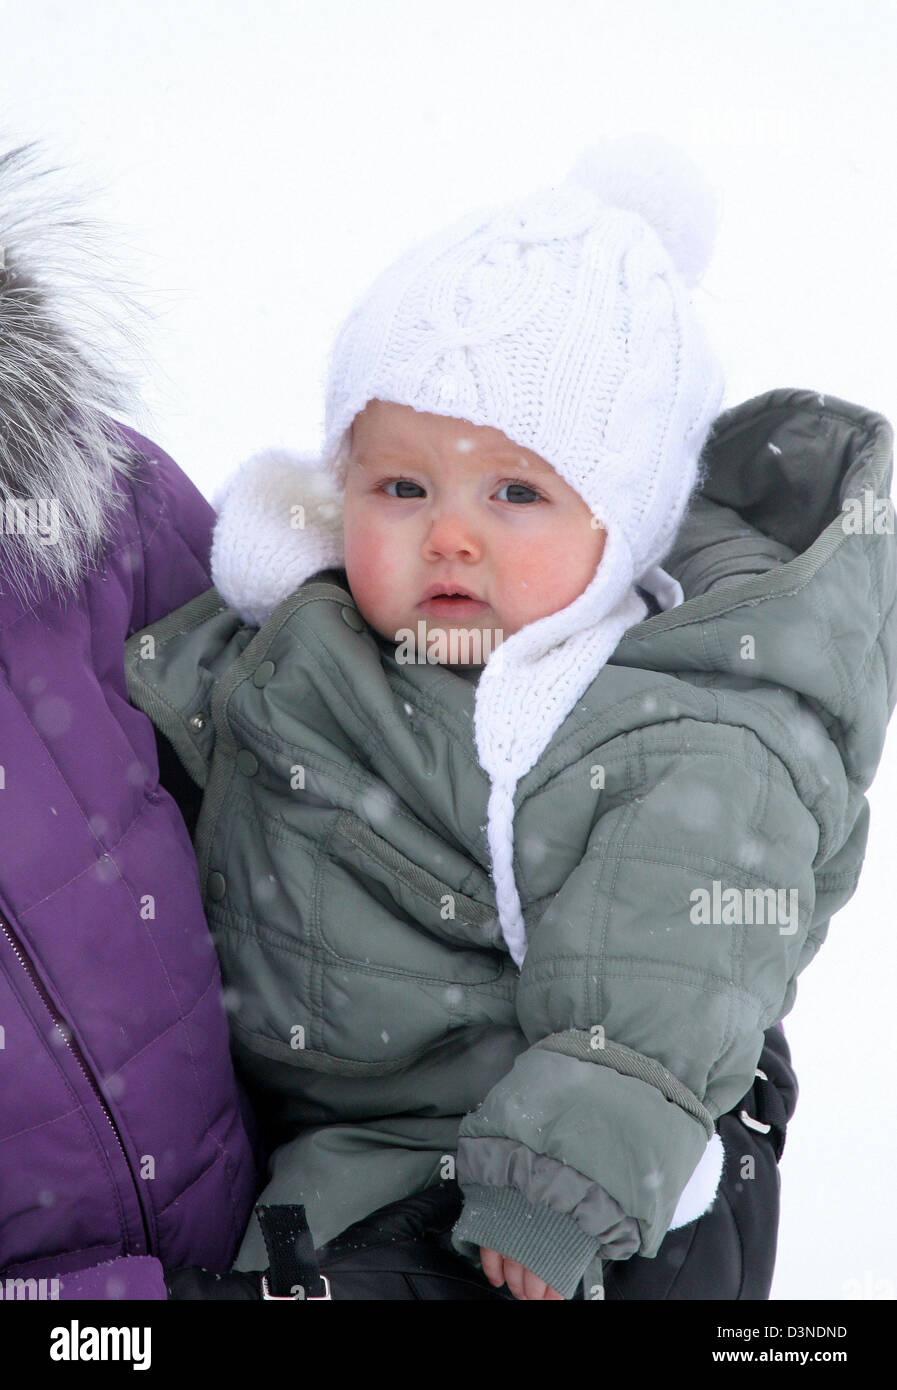 Princess Alexia of the Netherlands pictured during a skiing holiday with  her parents in Lech am Arlberg, Austria, 26 February 2006. Photo: Albert  Nieboer NETHERLANDS OUT Stock Photo - Alamy